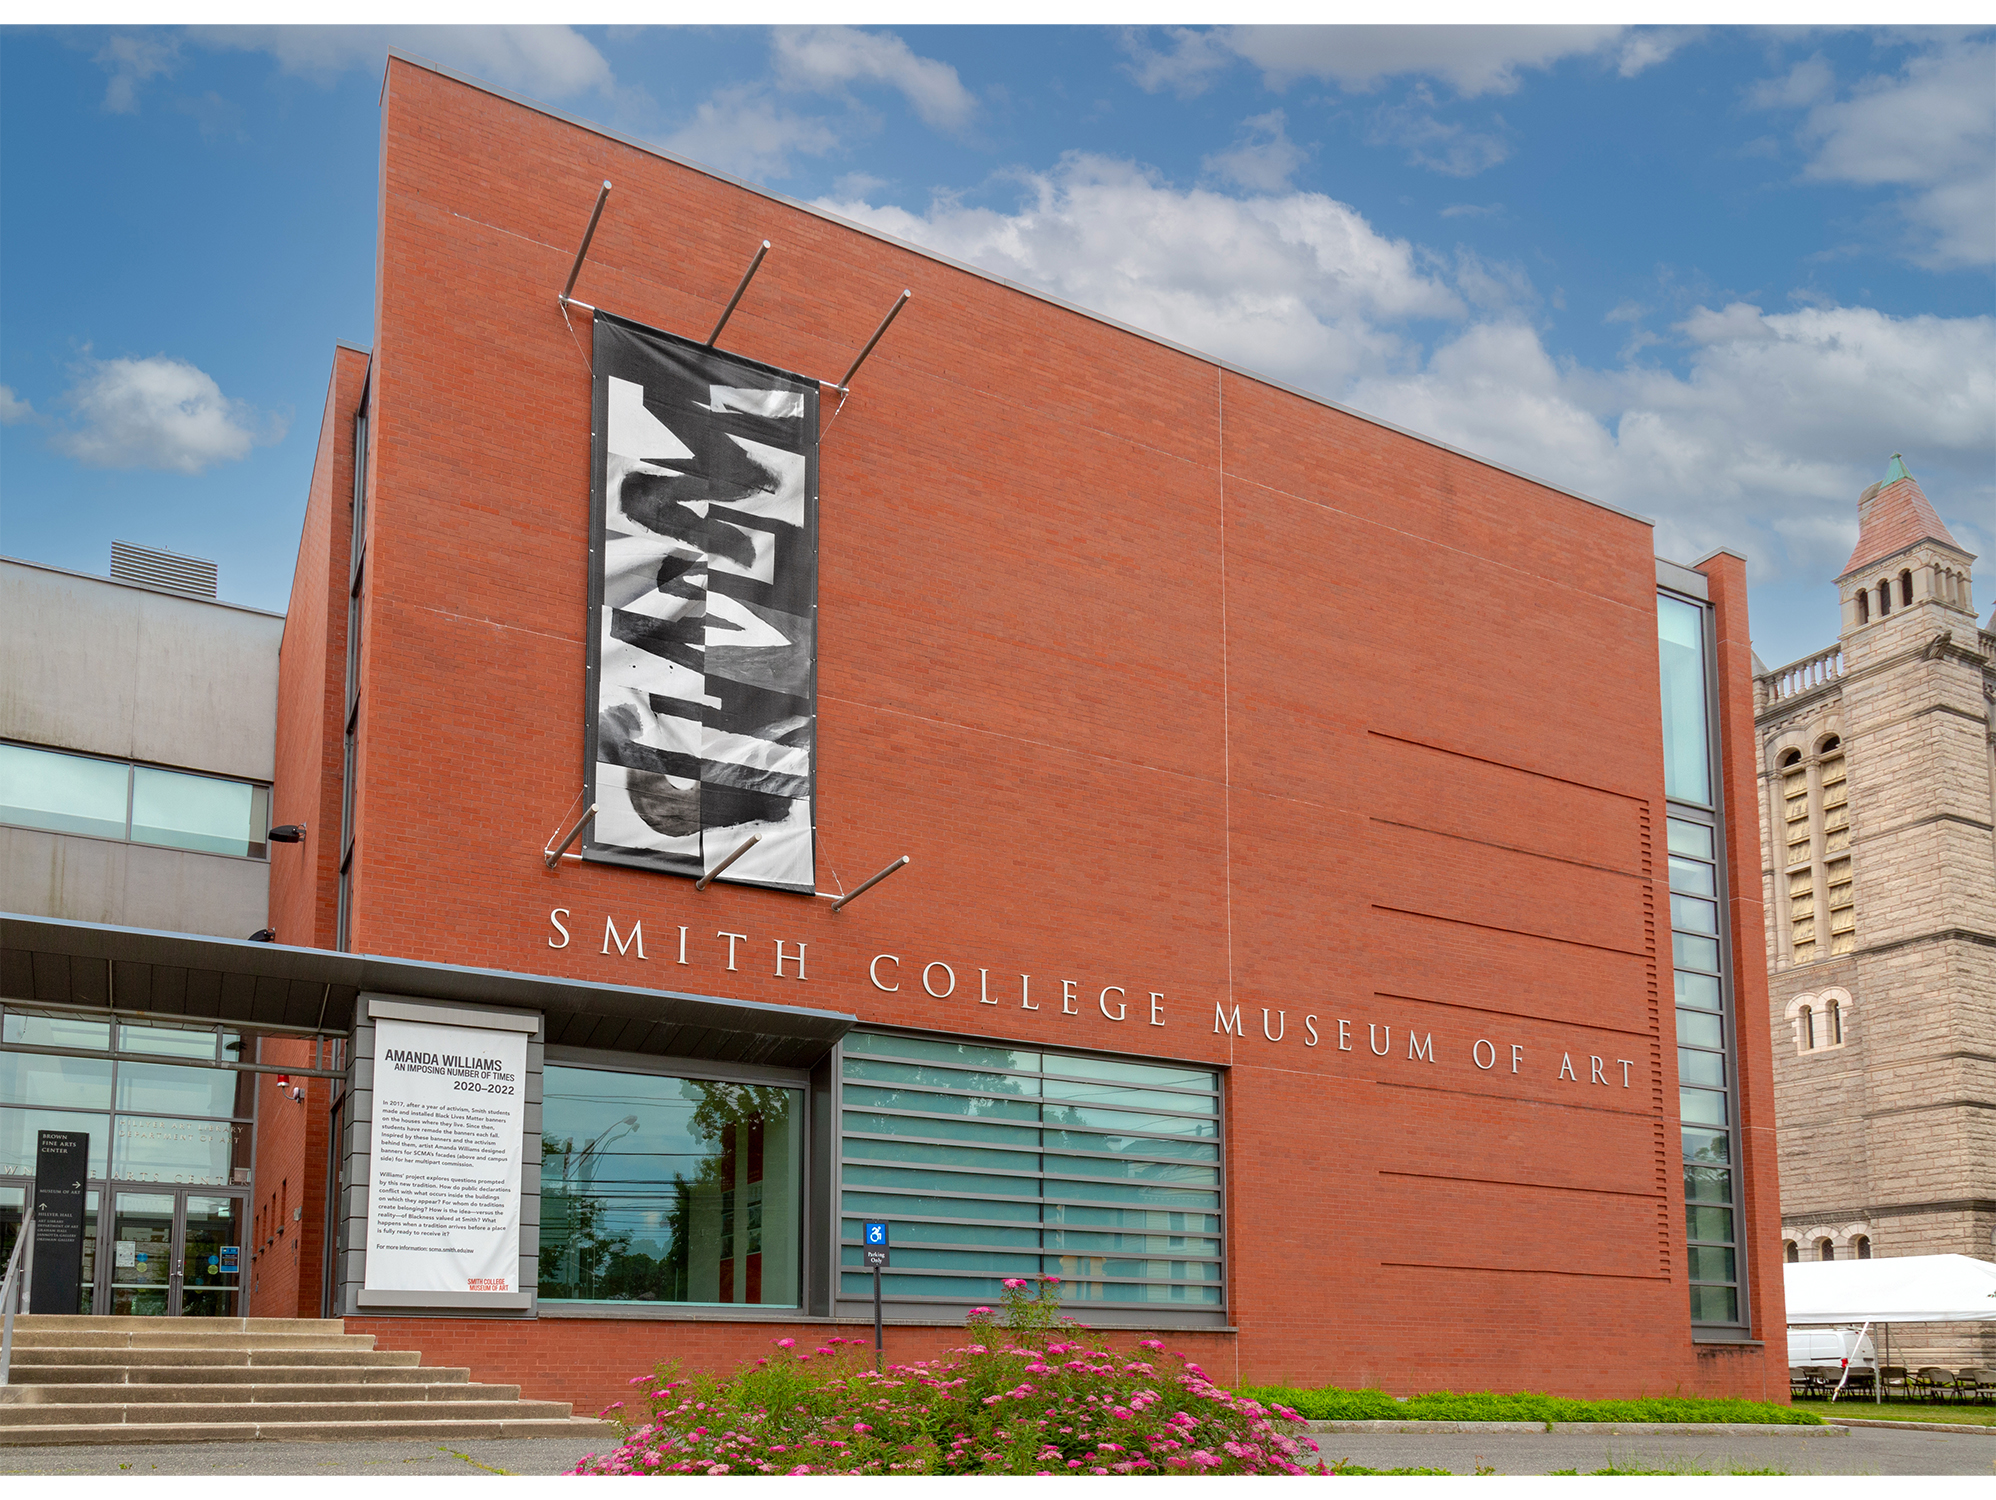 Amanda Williams, "An Imposing Number of Times" (2020–22), black and white banner on front of the Smith College Museum of Art